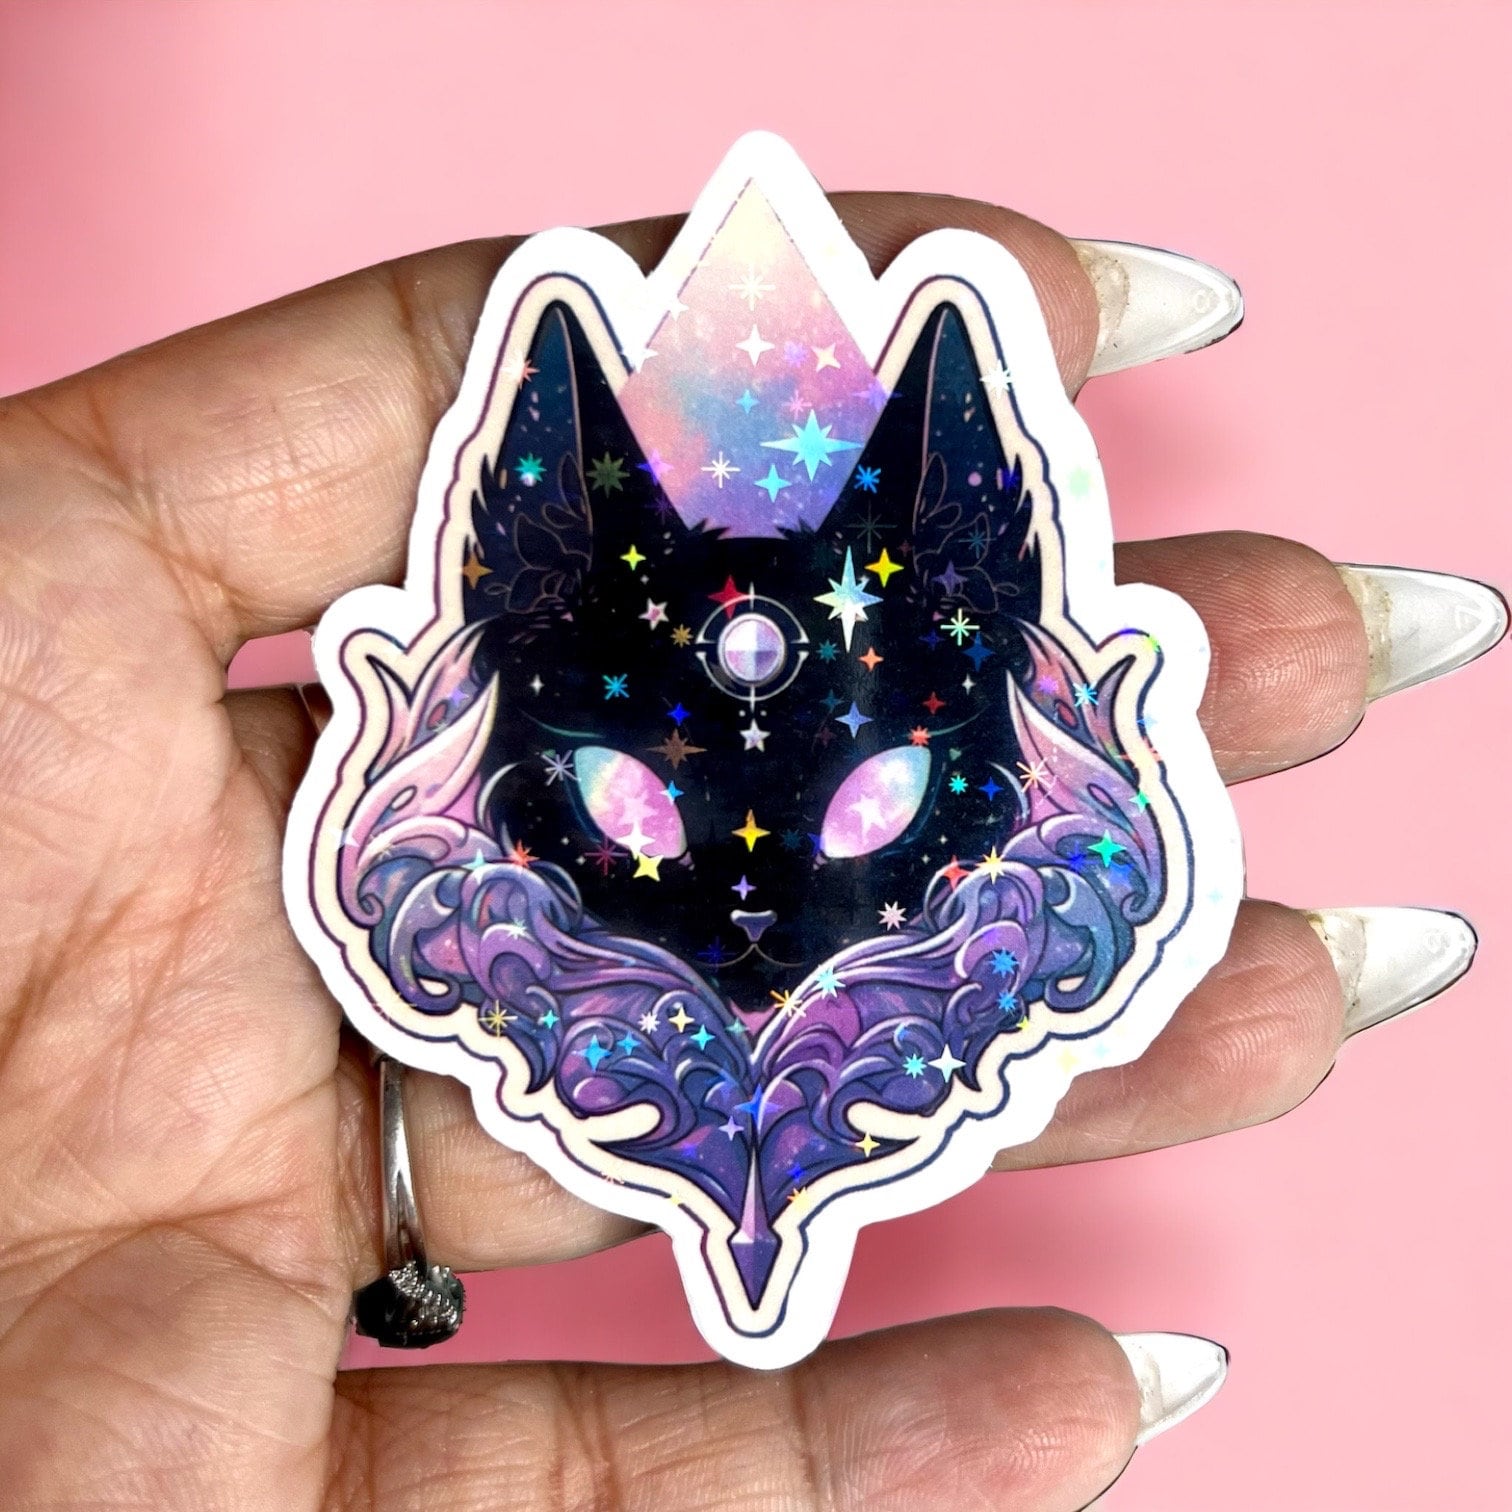 Celestial Cat Holographic Sticker | Witchy Sticker Cute Girly Spiritual Sticker for Notebook, Laptop, Phone, IPad Kindle, Kawaii, Tarot